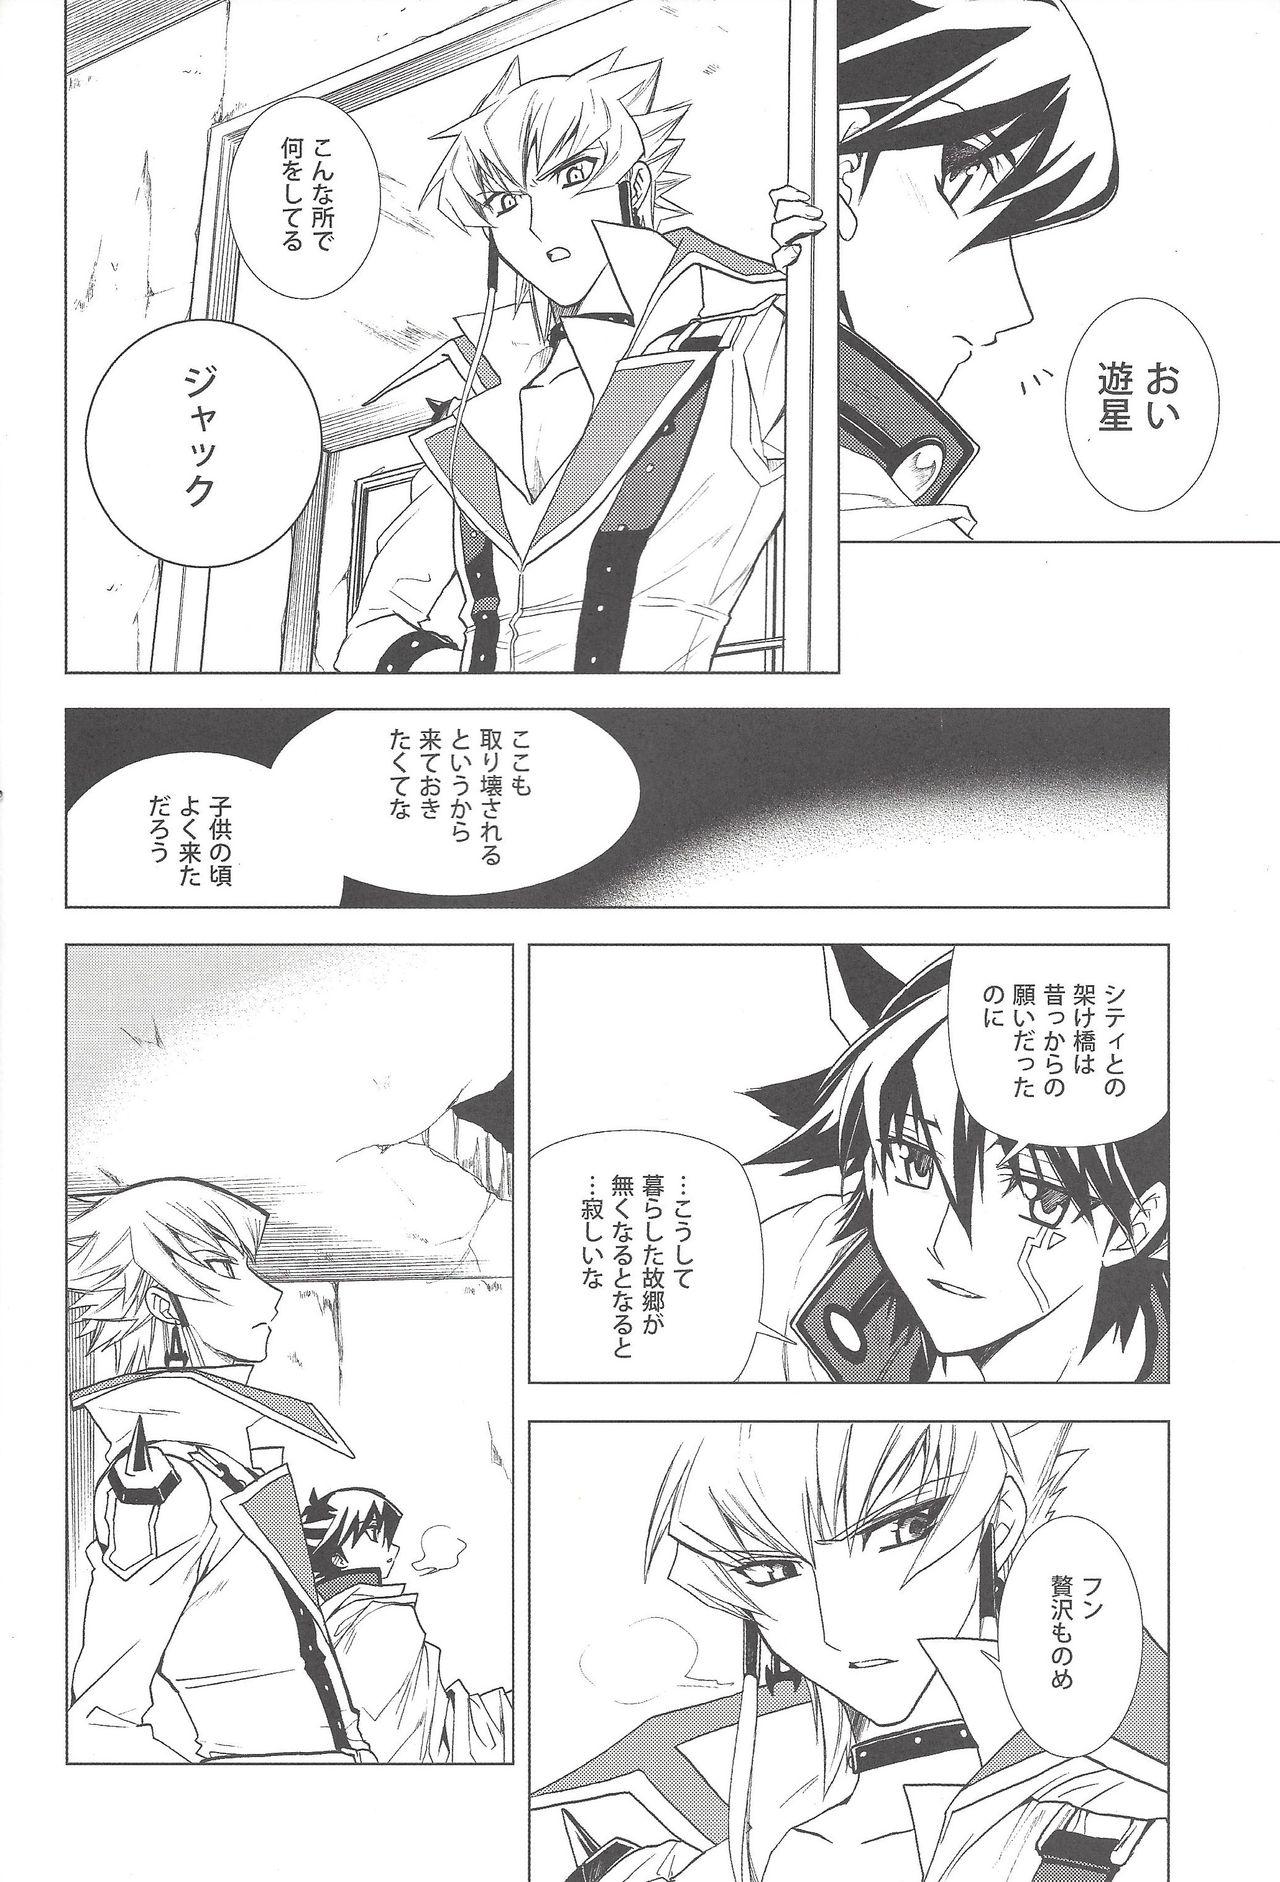 Nice LBV - Luminous Blue Variable - Yu gi oh 5ds Party - Page 9